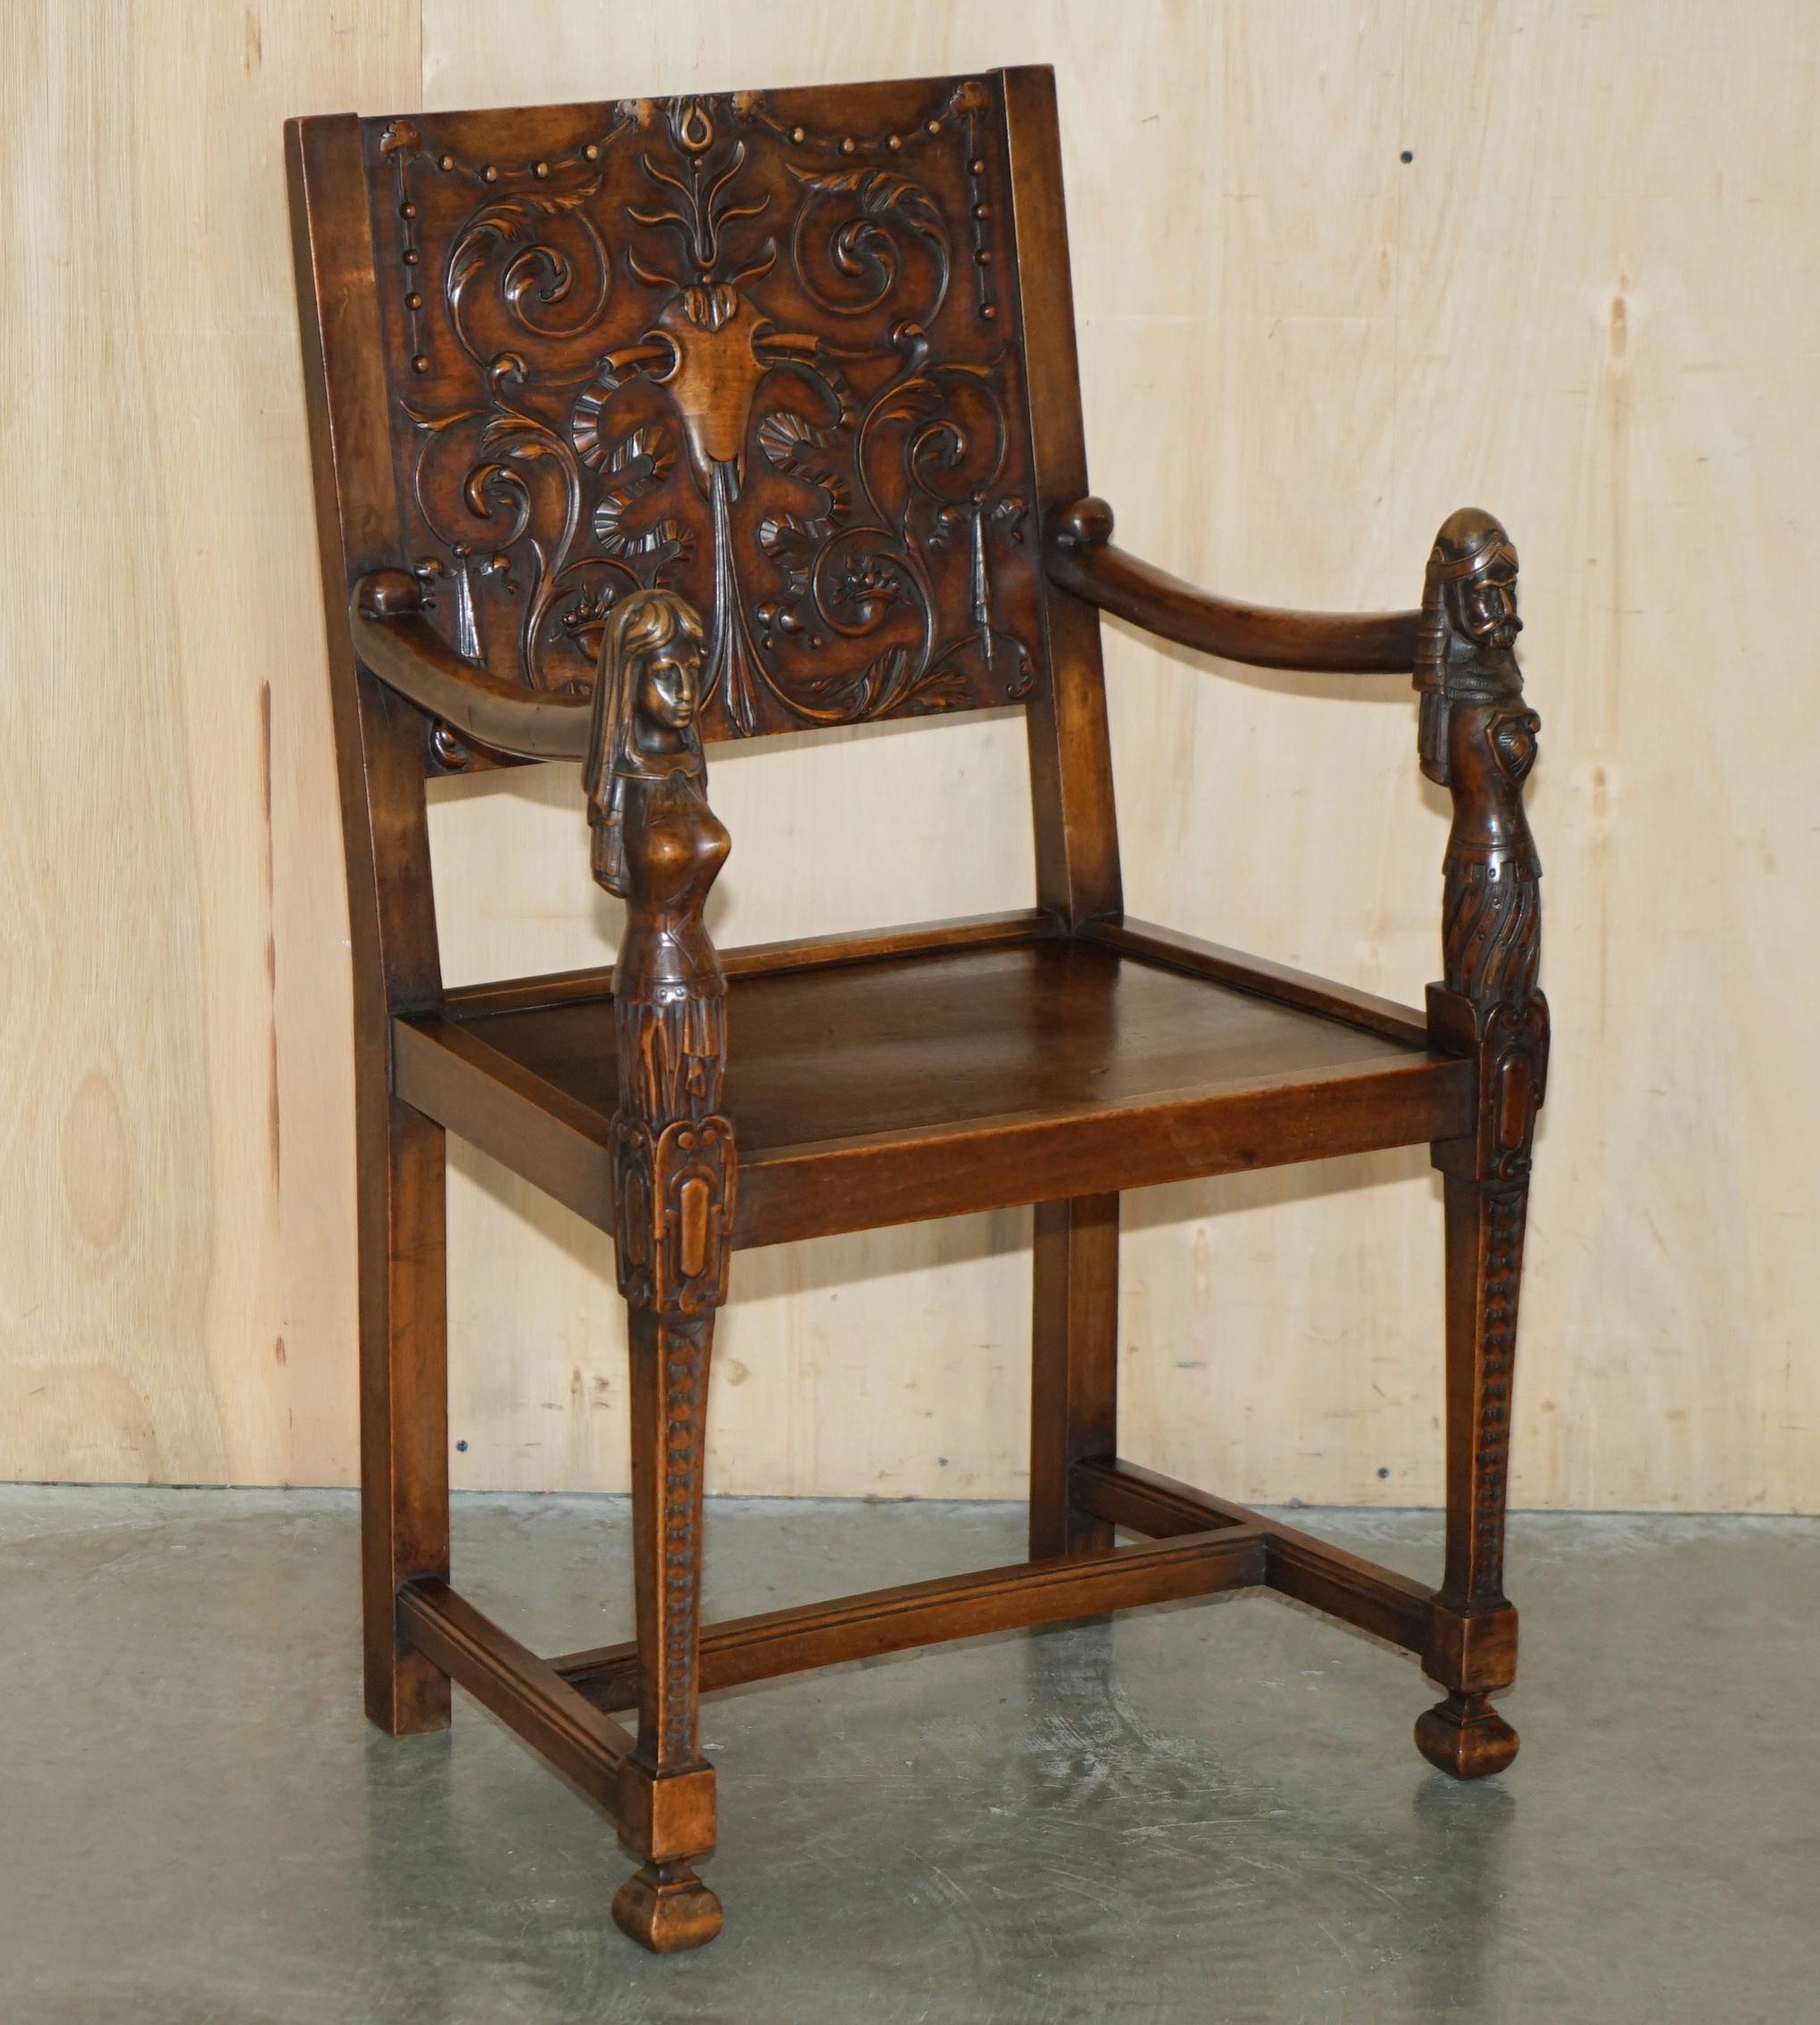 Royal House Antiques

Royal House Antiques is delighted to offer for sale this super rare pair of ornately hand carved Italian Neo Gothic ceremony chairs with hand carved arm rests and back panels 

Please note the delivery fee listed is just a